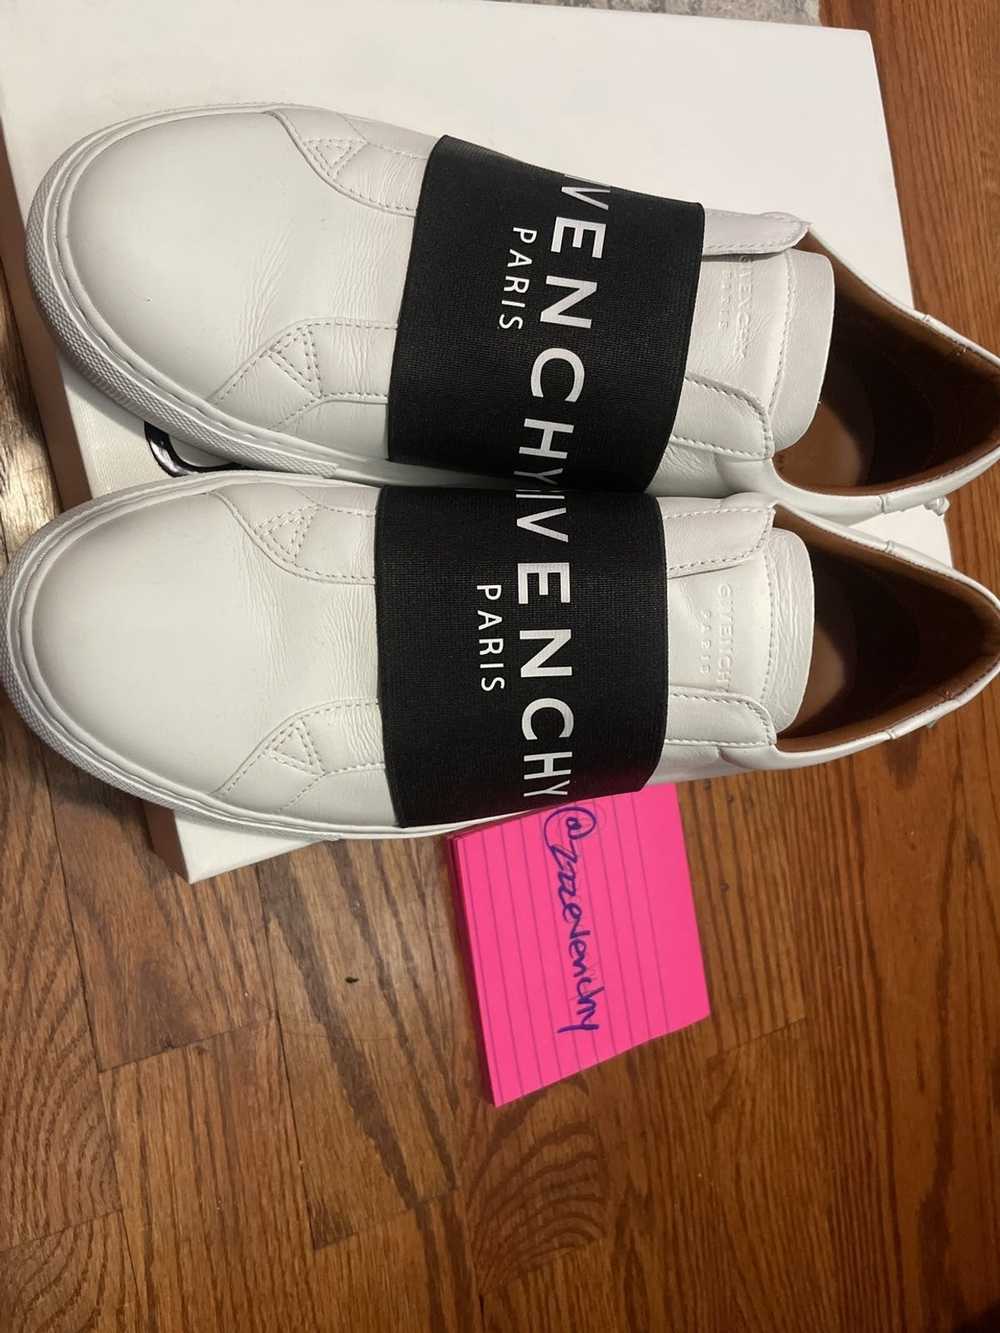 Givenchy Givenchy urban street logo sneakers - image 7